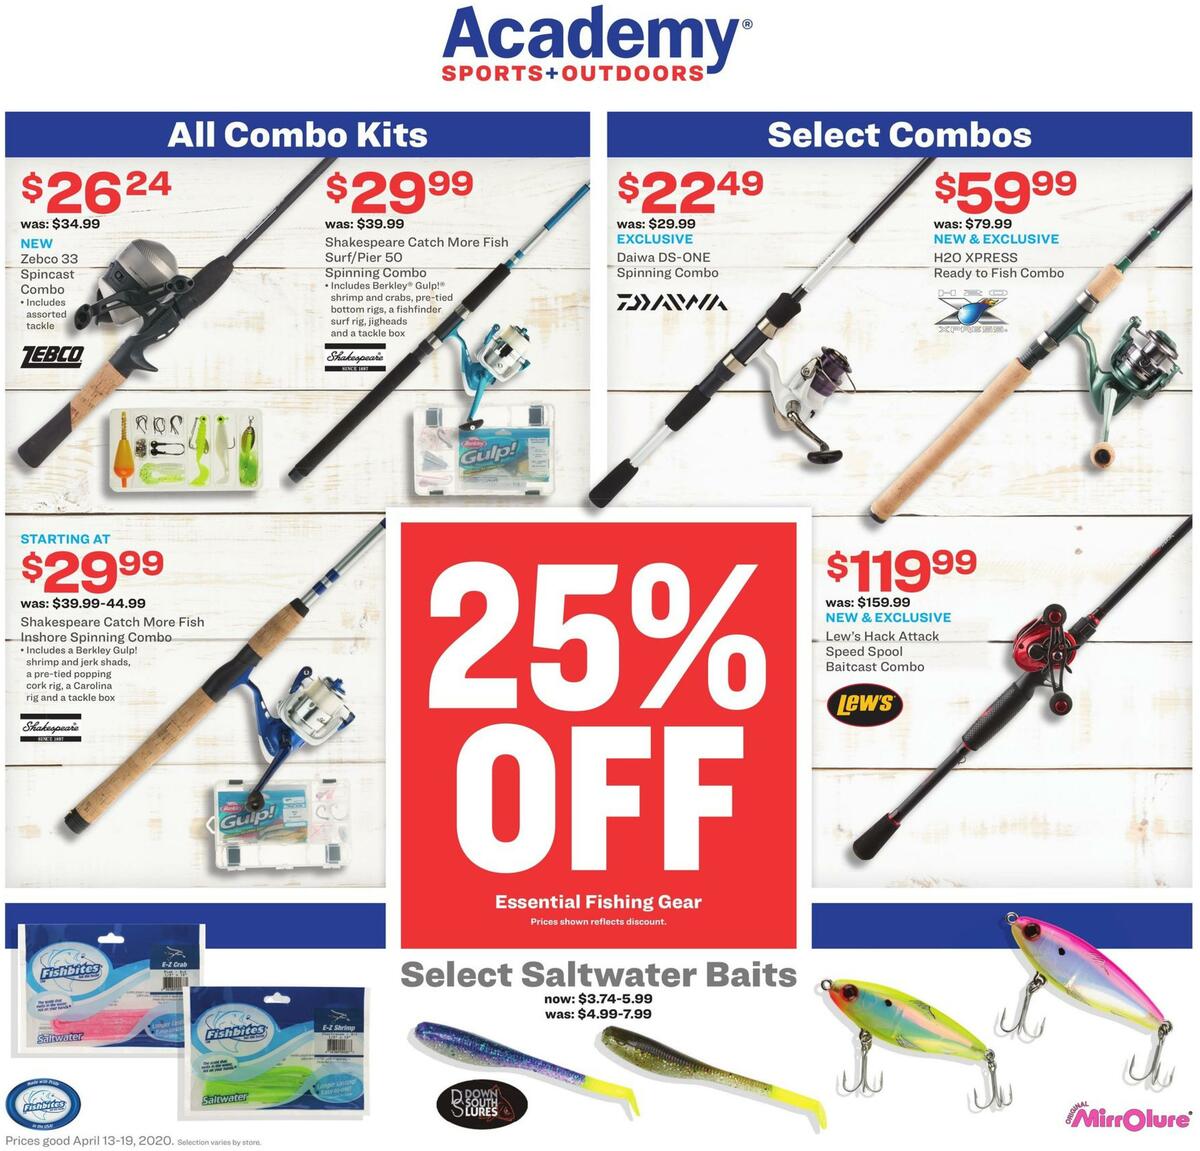 Academy Sports + Outdoors Outdoor Ad Weekly Ads and Circulars from April 13